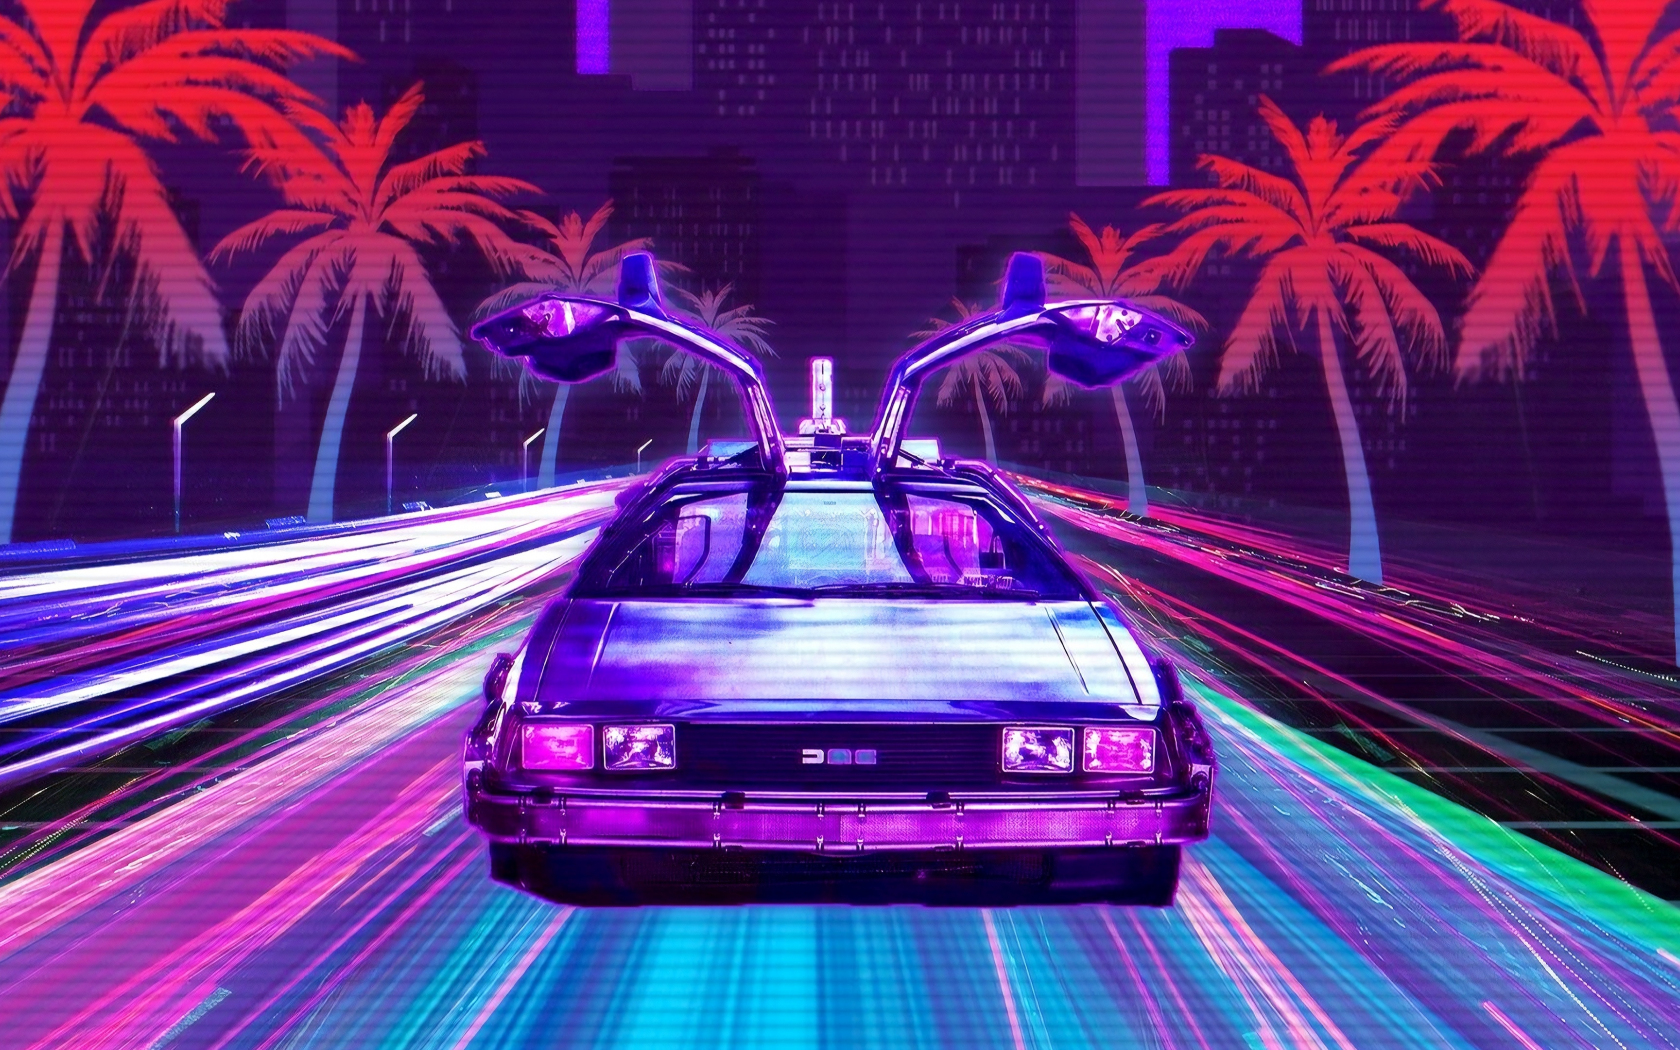 Download 1680x1050 Wallpaper Retro Lux Cars Outdrive Retrowave Widescreen 16 10 Widescreen 1680x1050 Hd Image Background